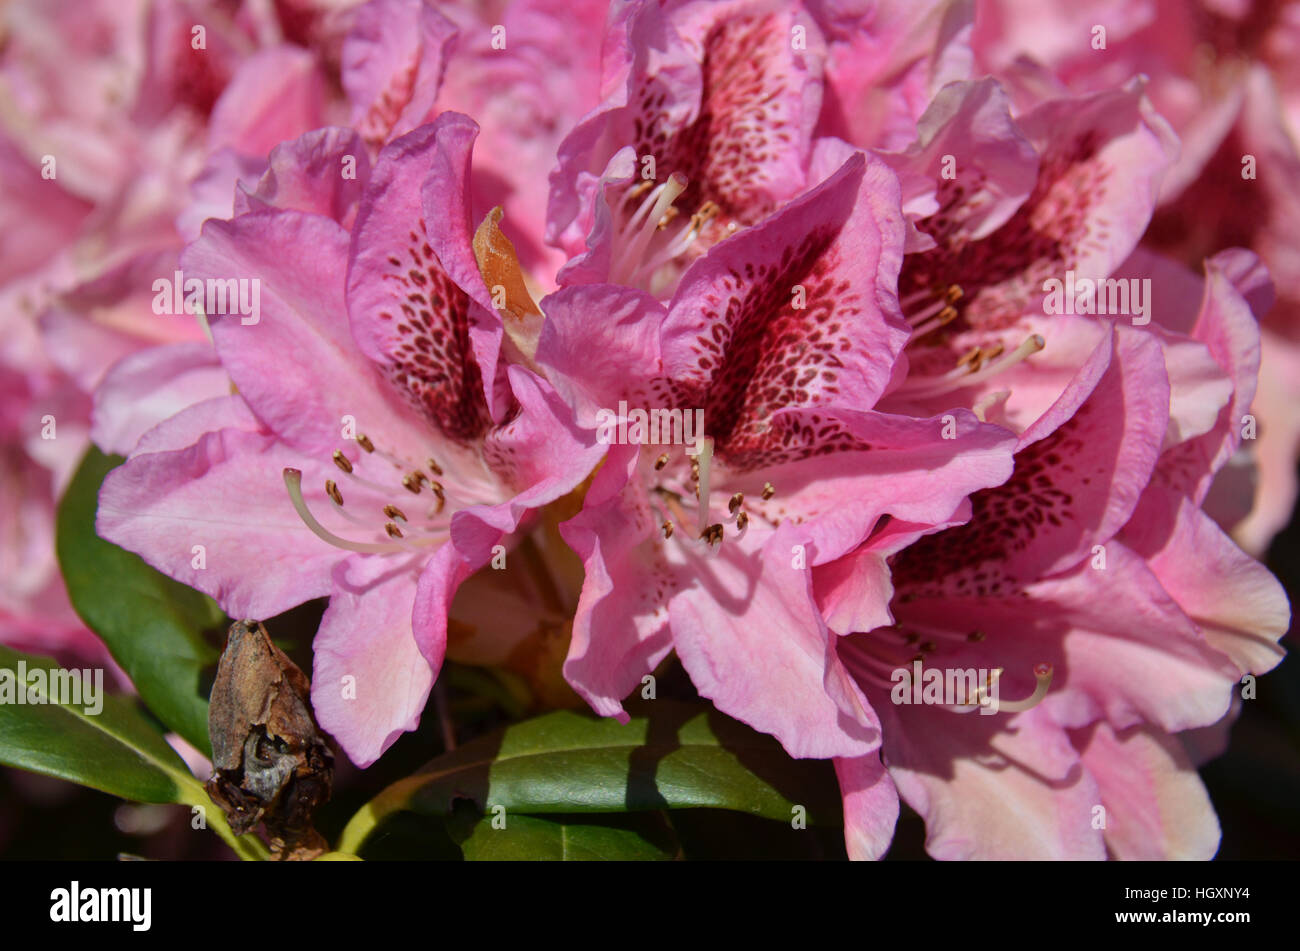 Rhododendron (Fam; Ericaceae) Stock Photo